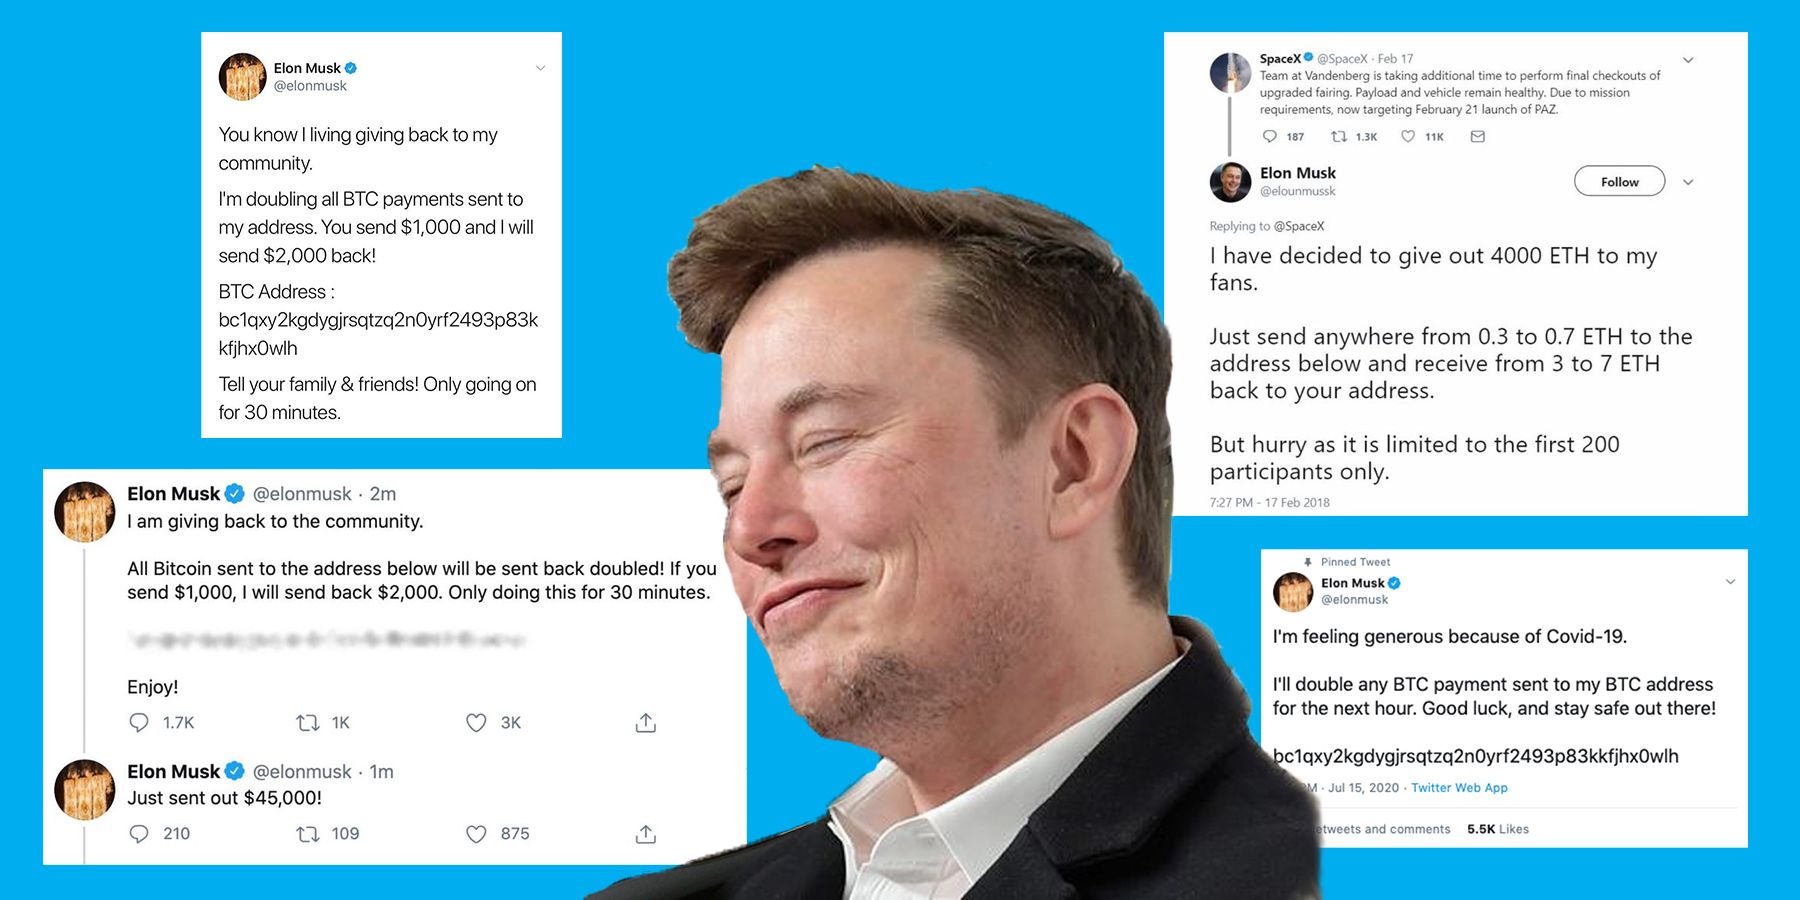 Twitter & Elon Musk’s Bitcoin Scam Problem Has Been Going On For Years